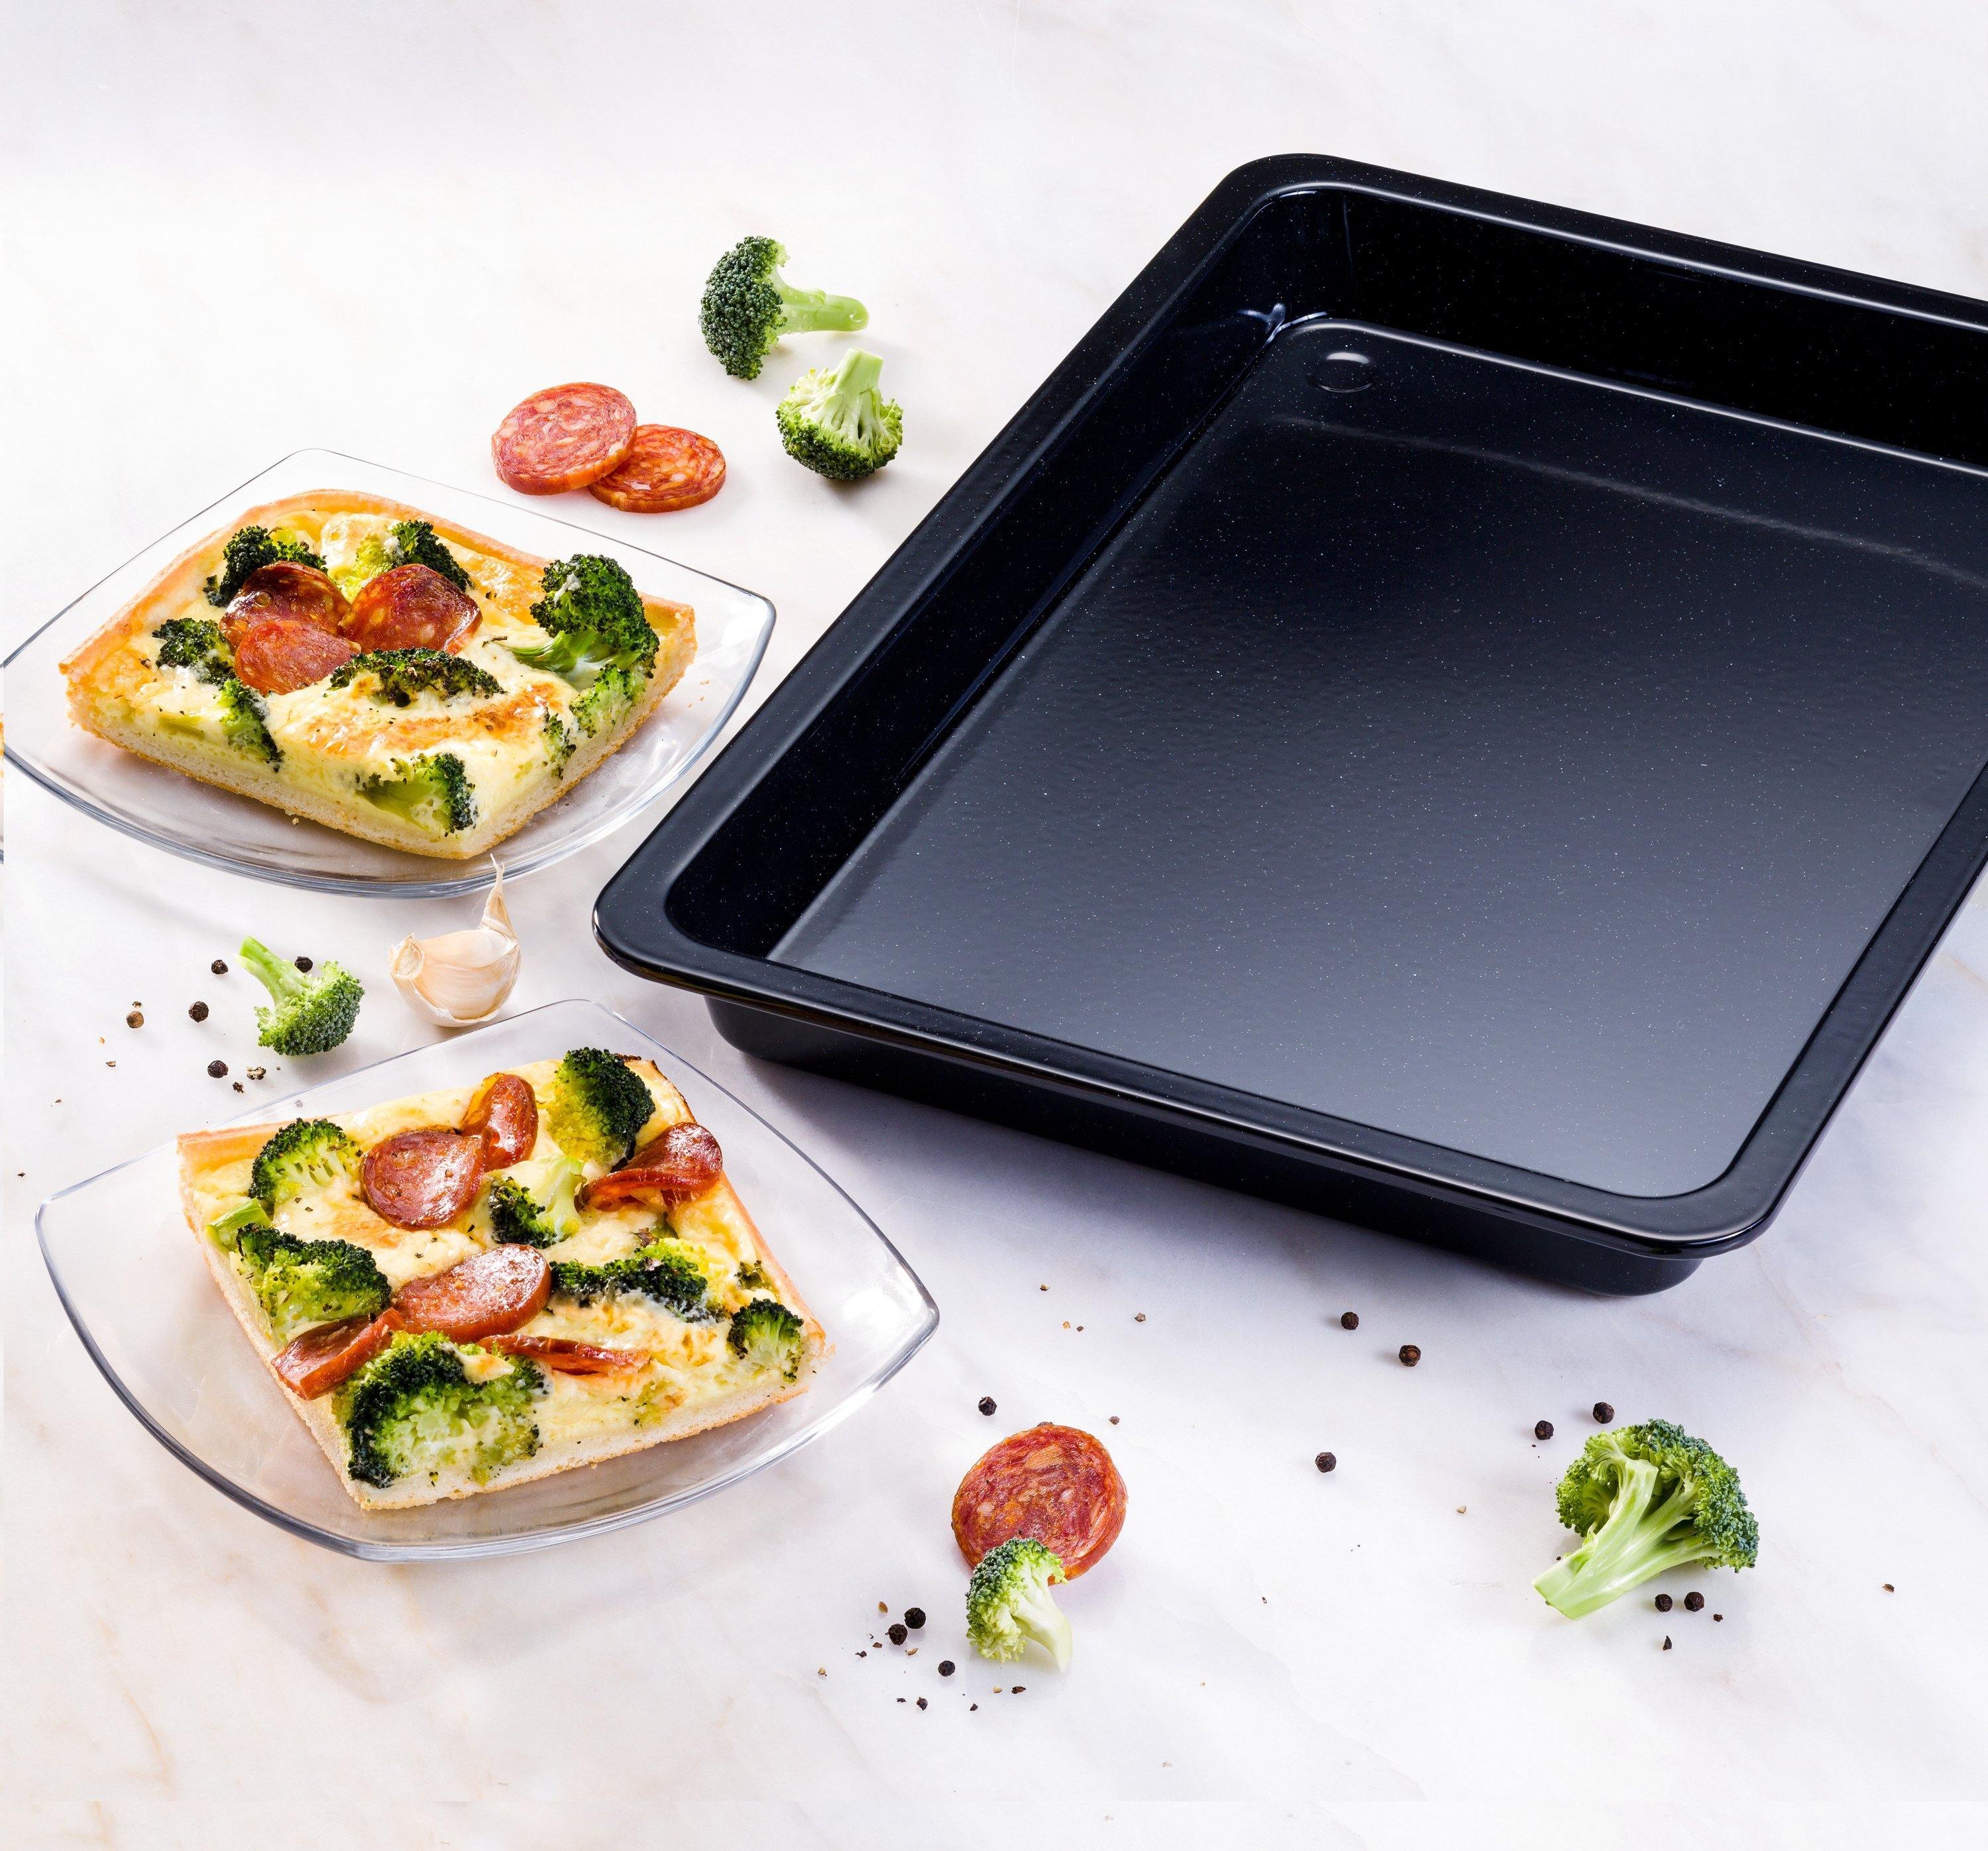 Dr. Oetker "Back-Idee Kreativ" Pizza And Baking Tray Enamel, Black, 42X29X4 Cm - Whole and All